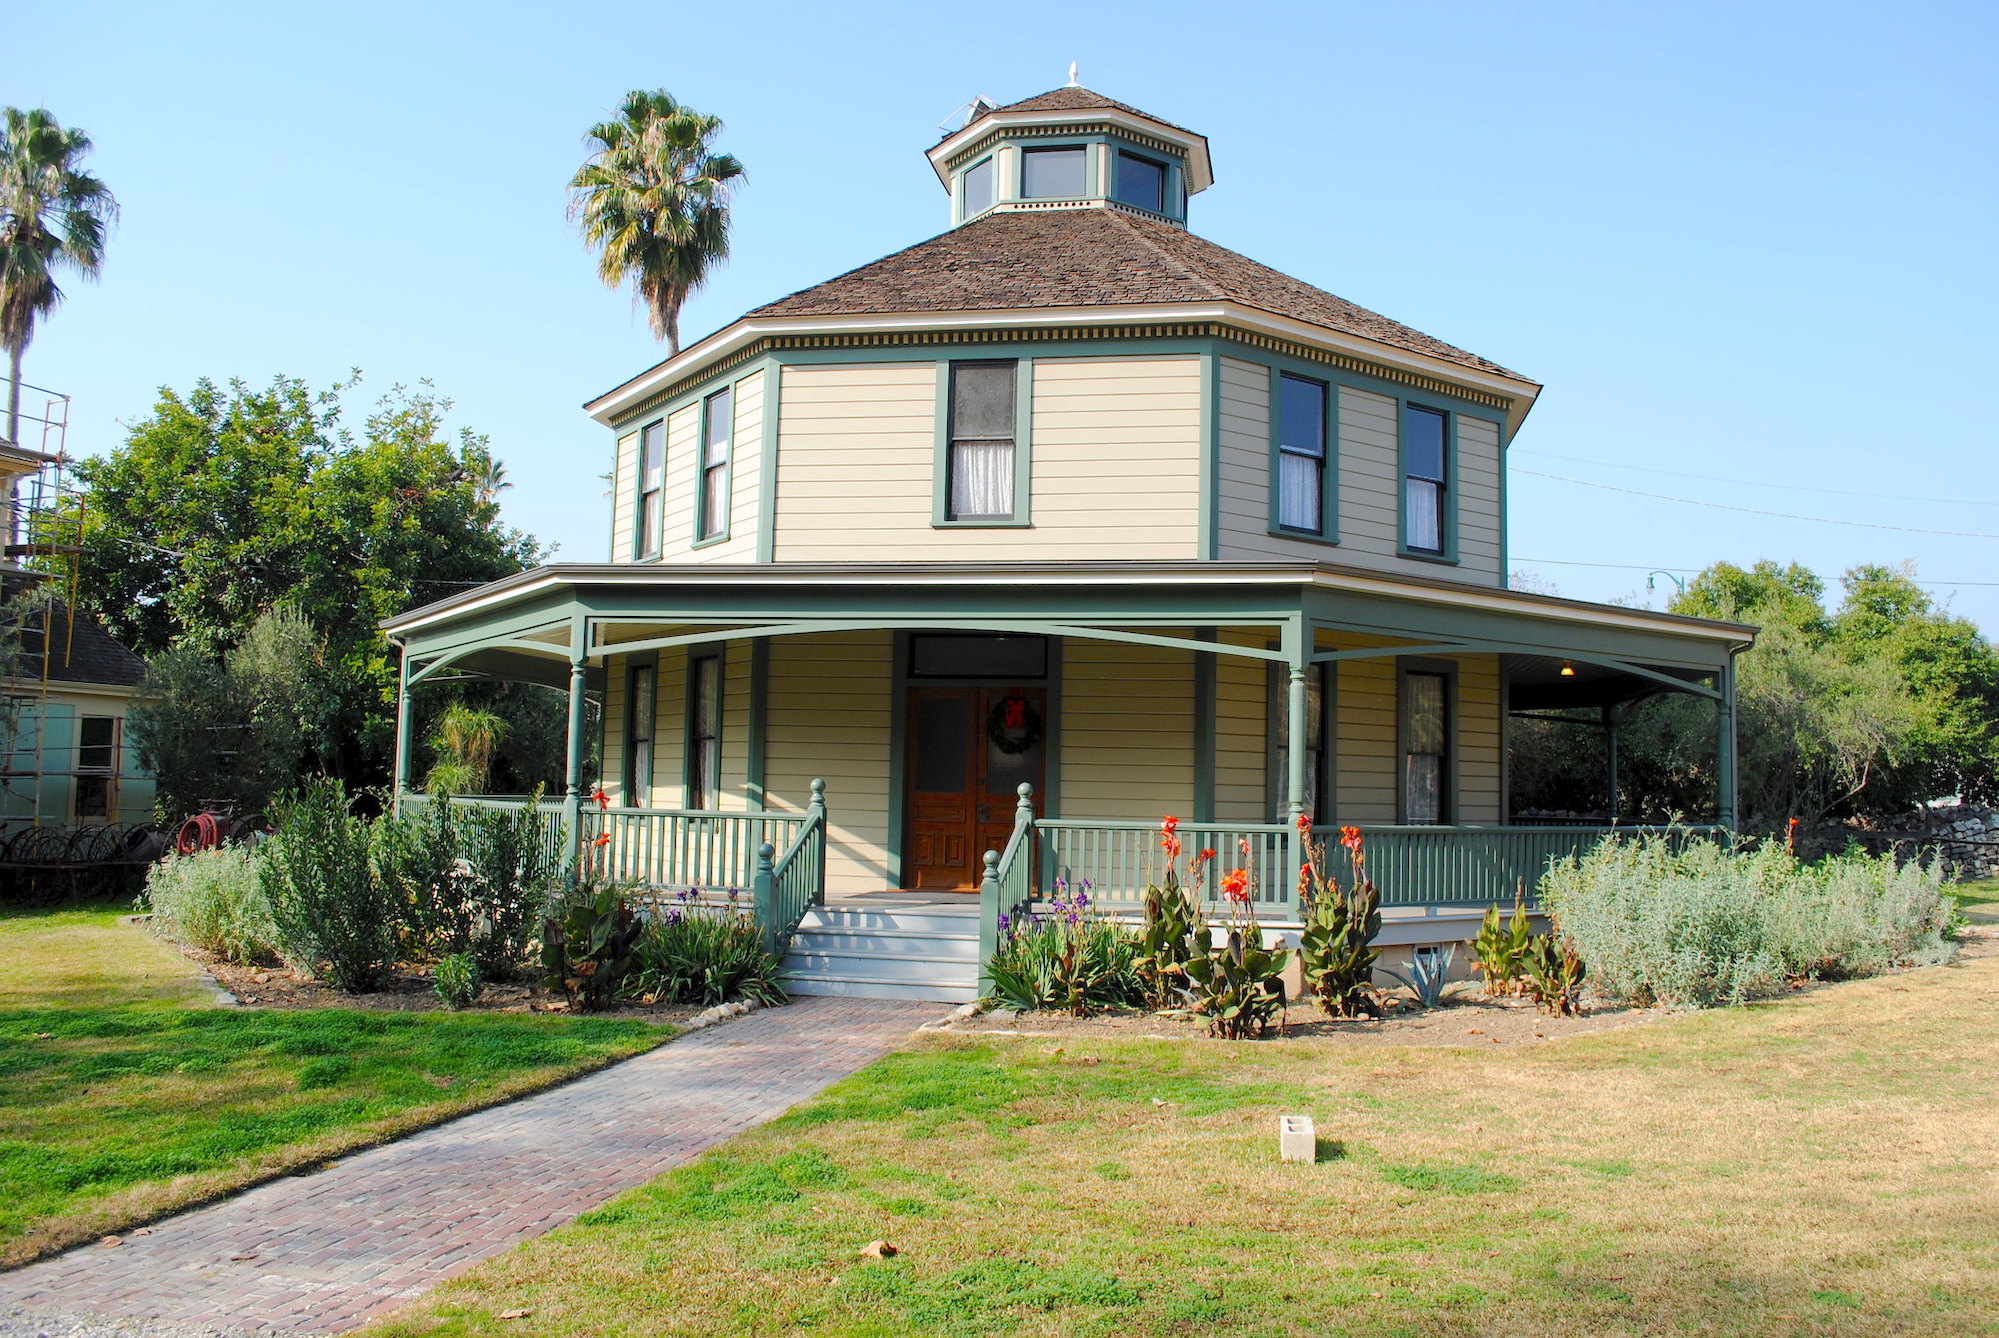 Historical home at Heritage Square Museum